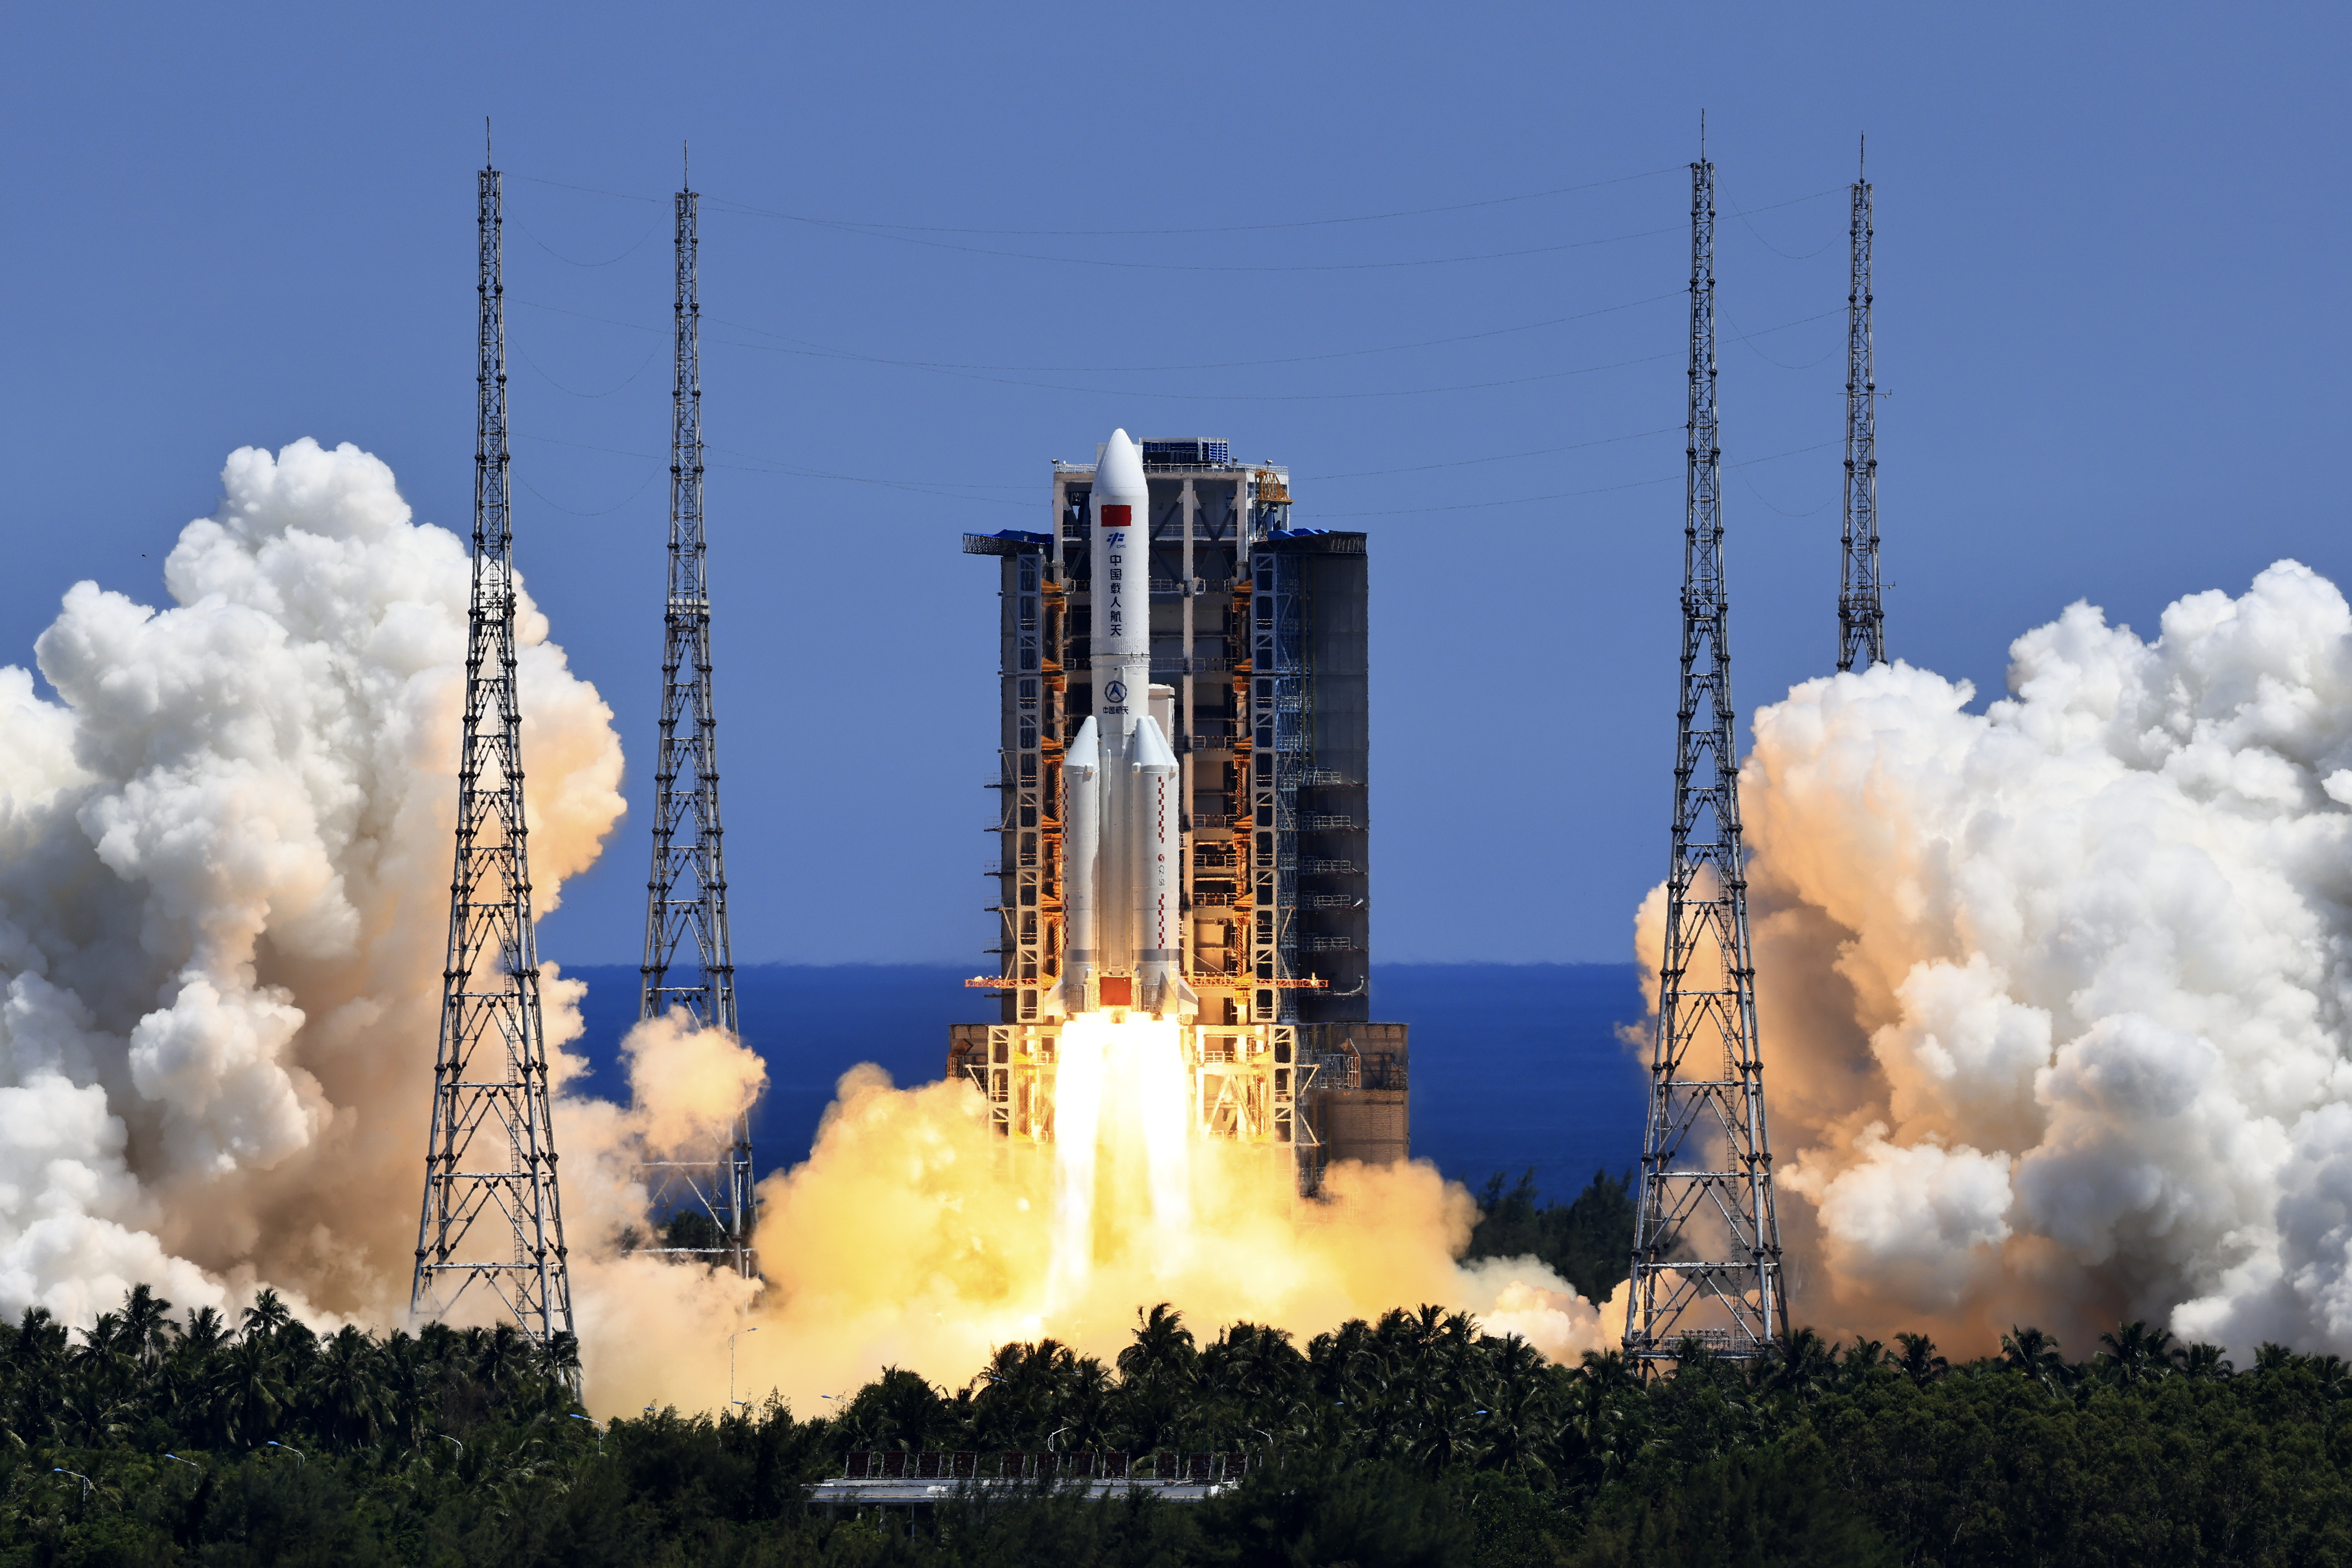 The Long March 5B Y3 carrier rocket was launched from the Wenchang Space Launch Centre in China's Hainan province on July 24. Some of its debris fell into the Indian Ocean on Saturday.